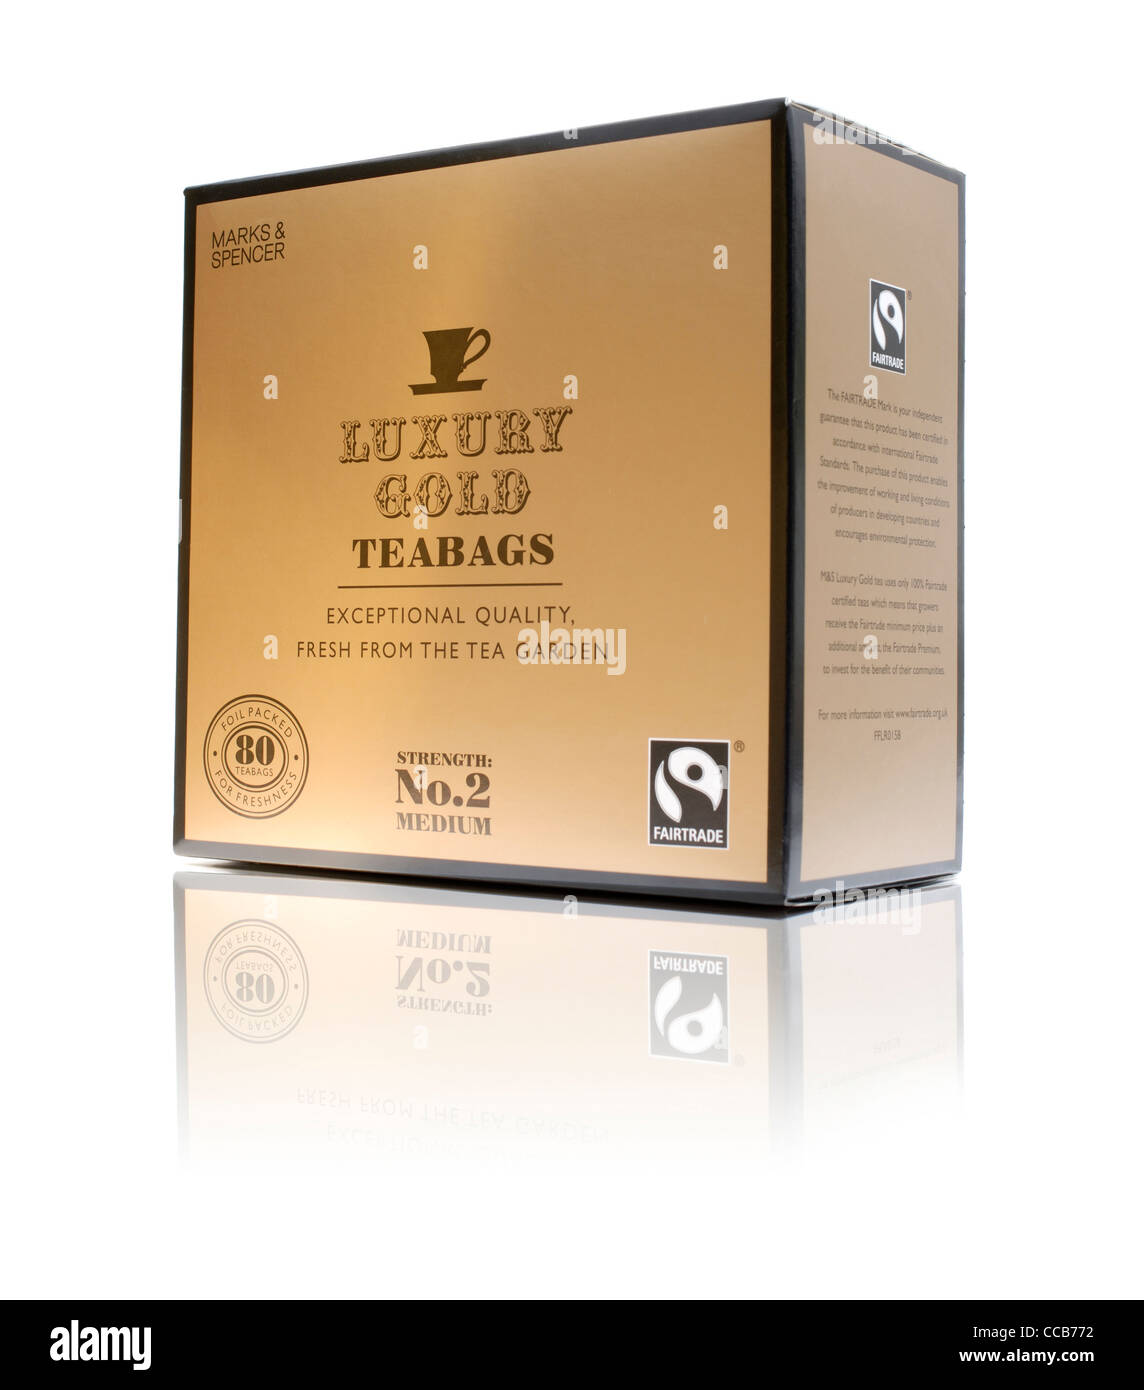 Marks and Spencer Luxury Gold tea bags Stock Photo